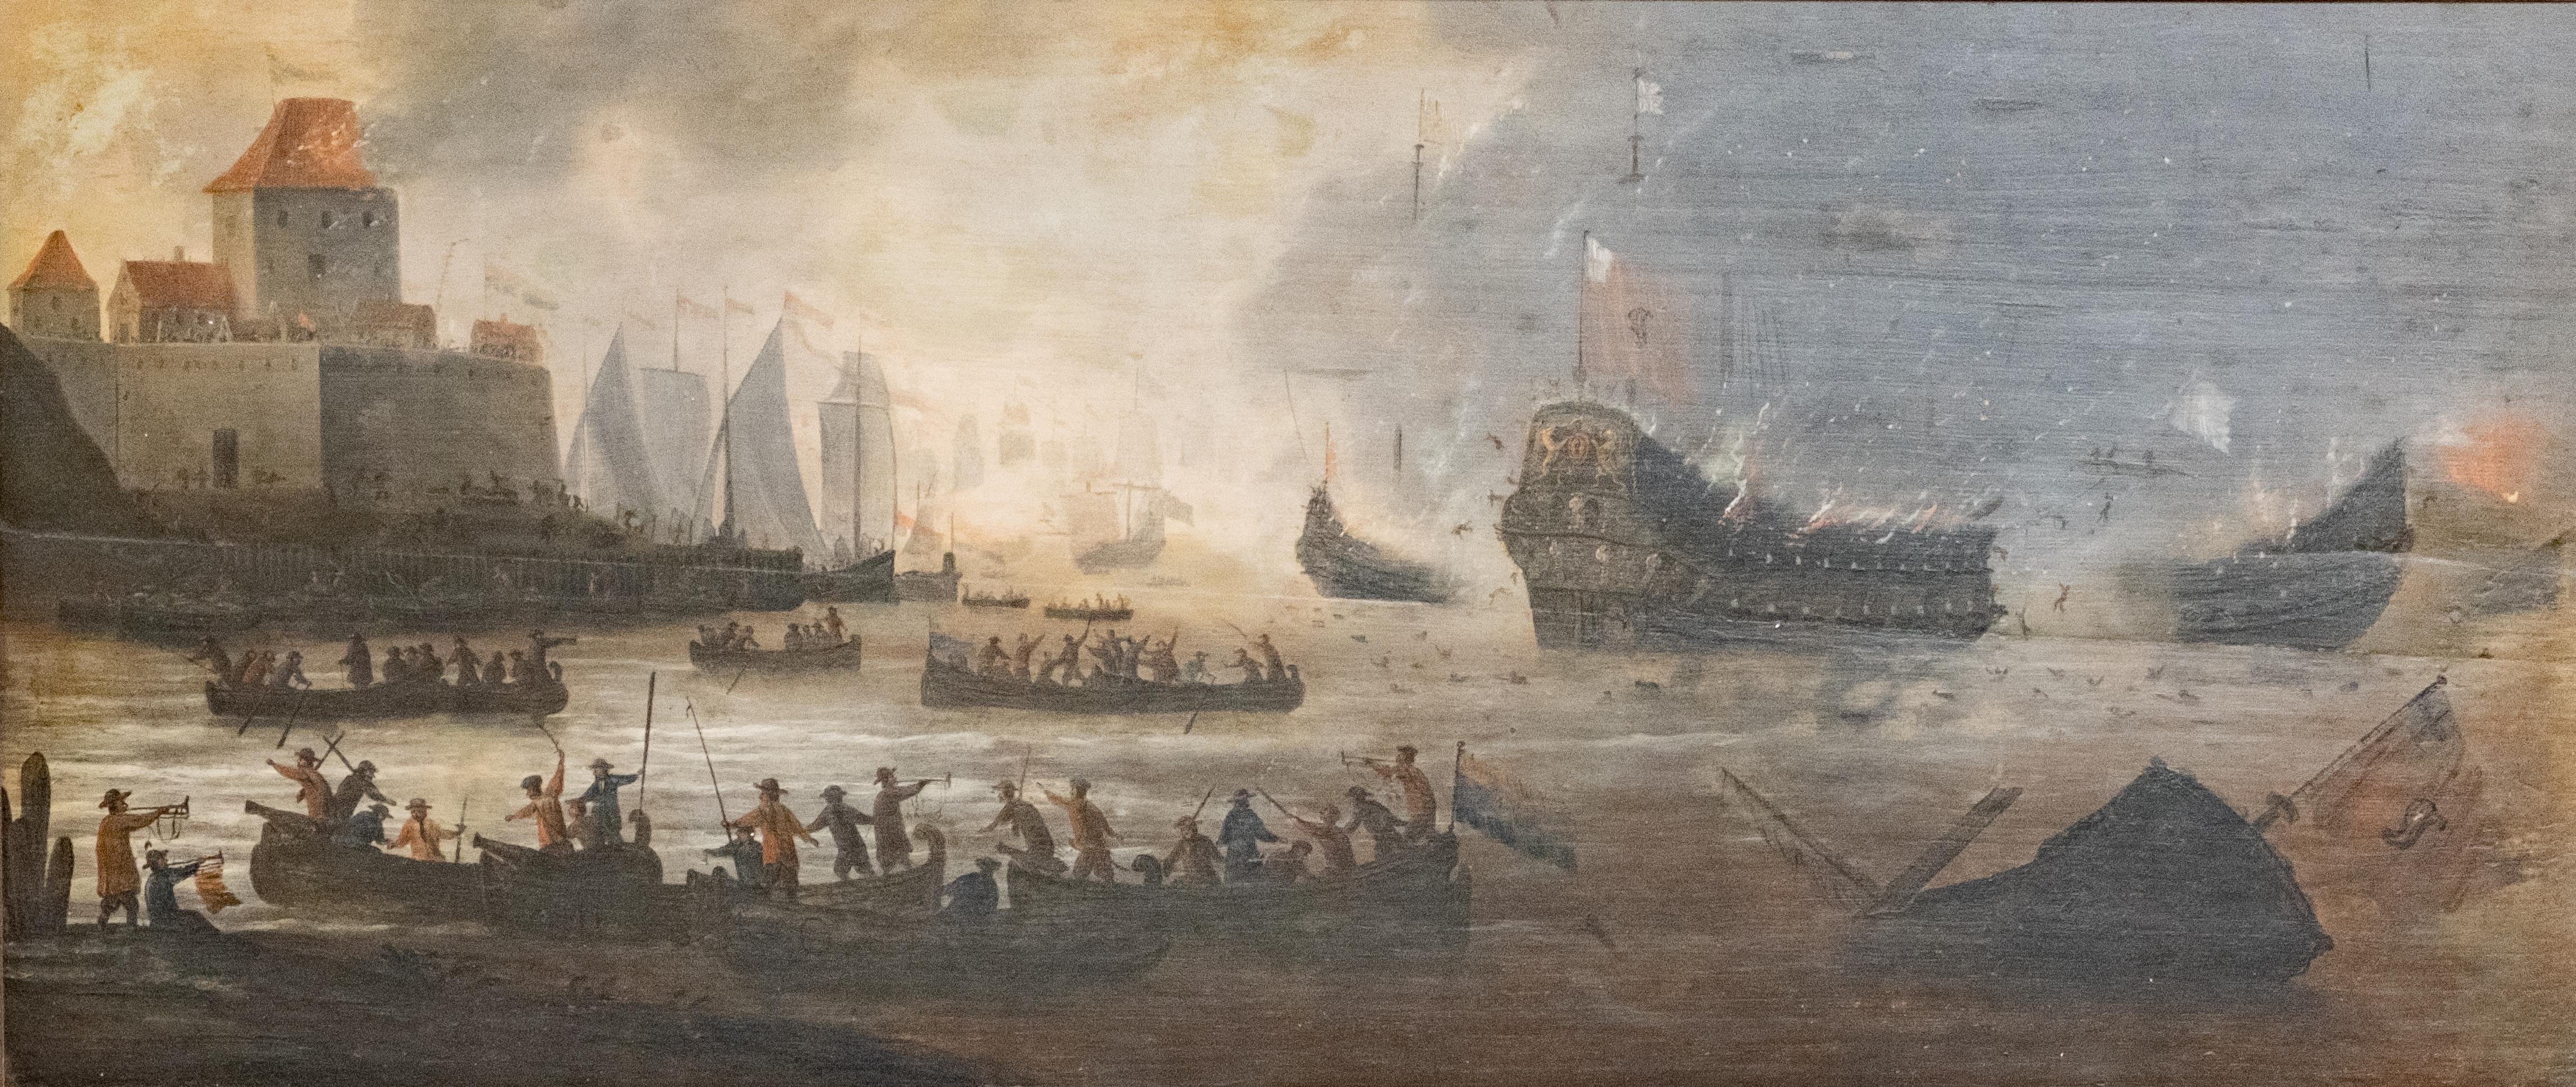 Maritime Painting 18th C Battle Scene on Oil Painting on Cradled Wood Panel.Very dramatic and very well executed rendering of a naval offensive against a fortified city, oil painting depicting a very detailed maritime battle scene. Seemingly